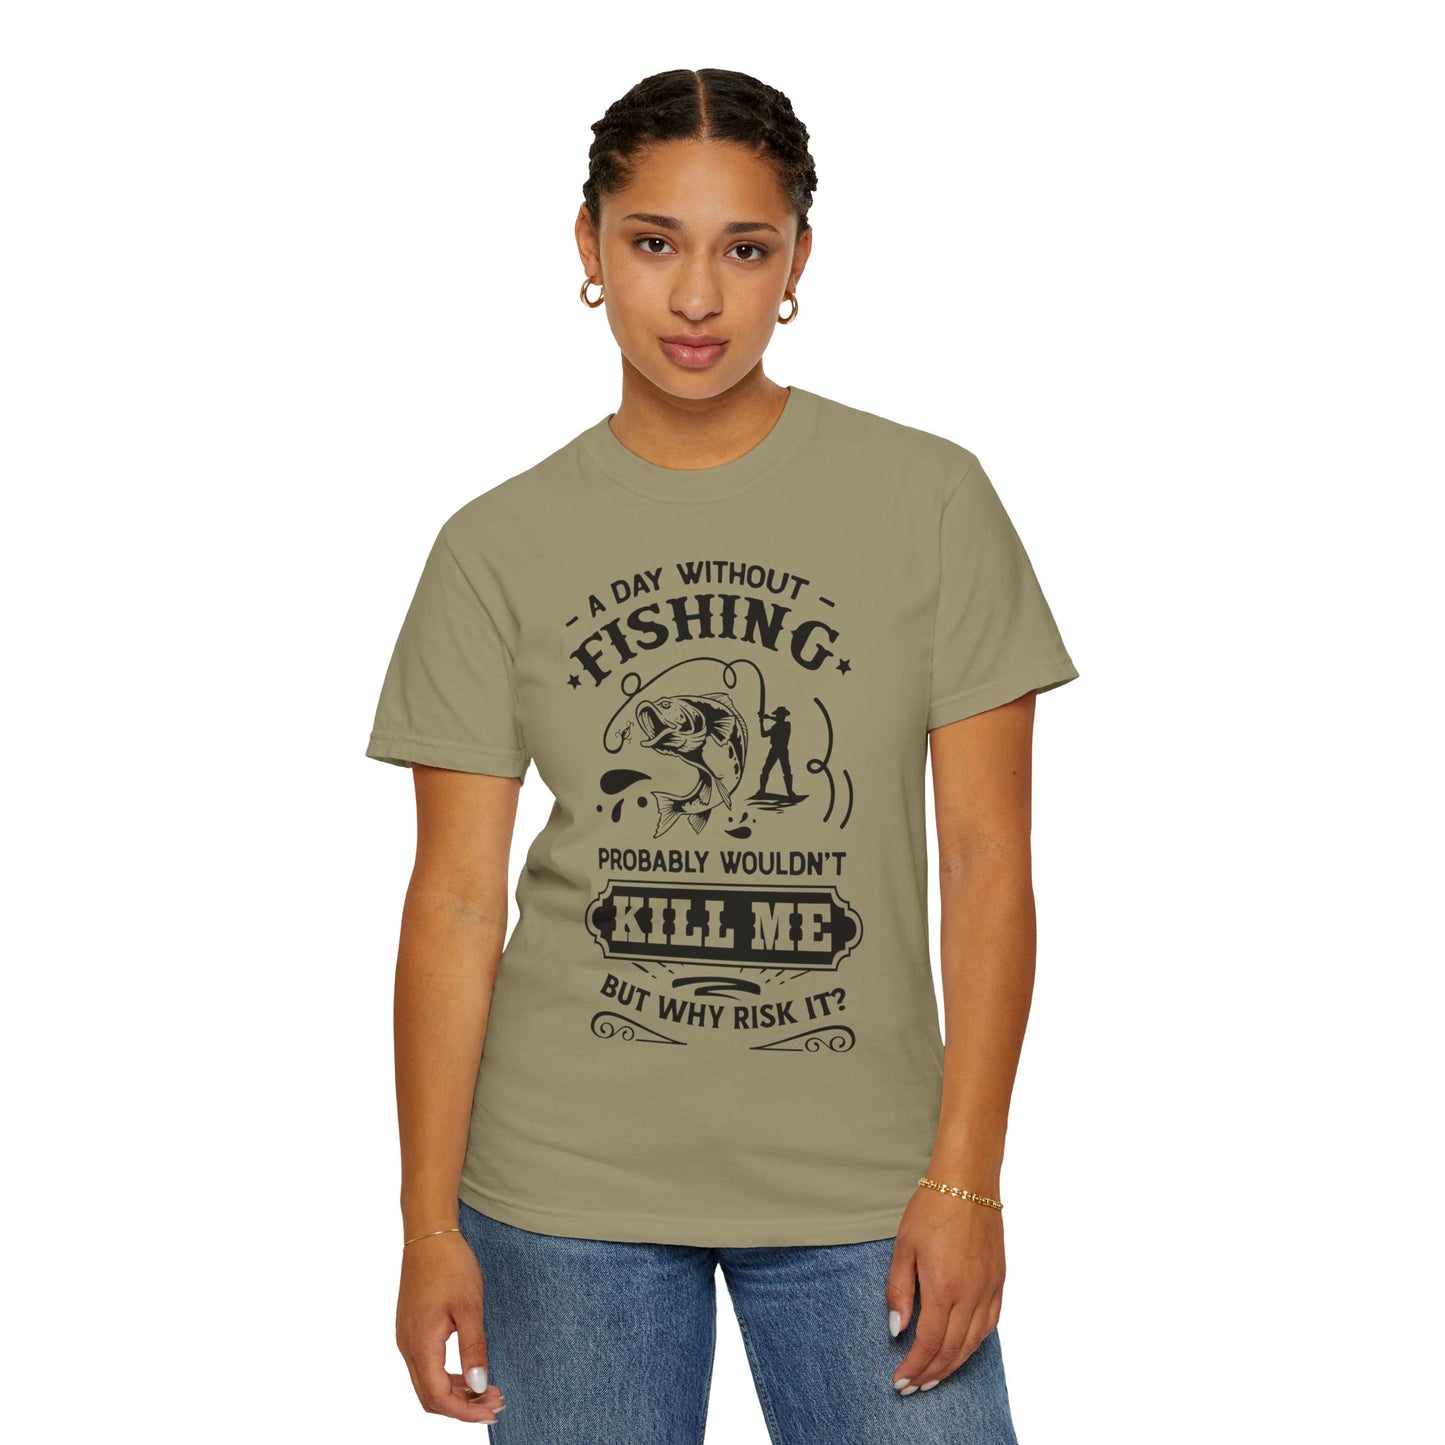 Why risk of not going fishing: Unisex Garment-Dyed T-shirt